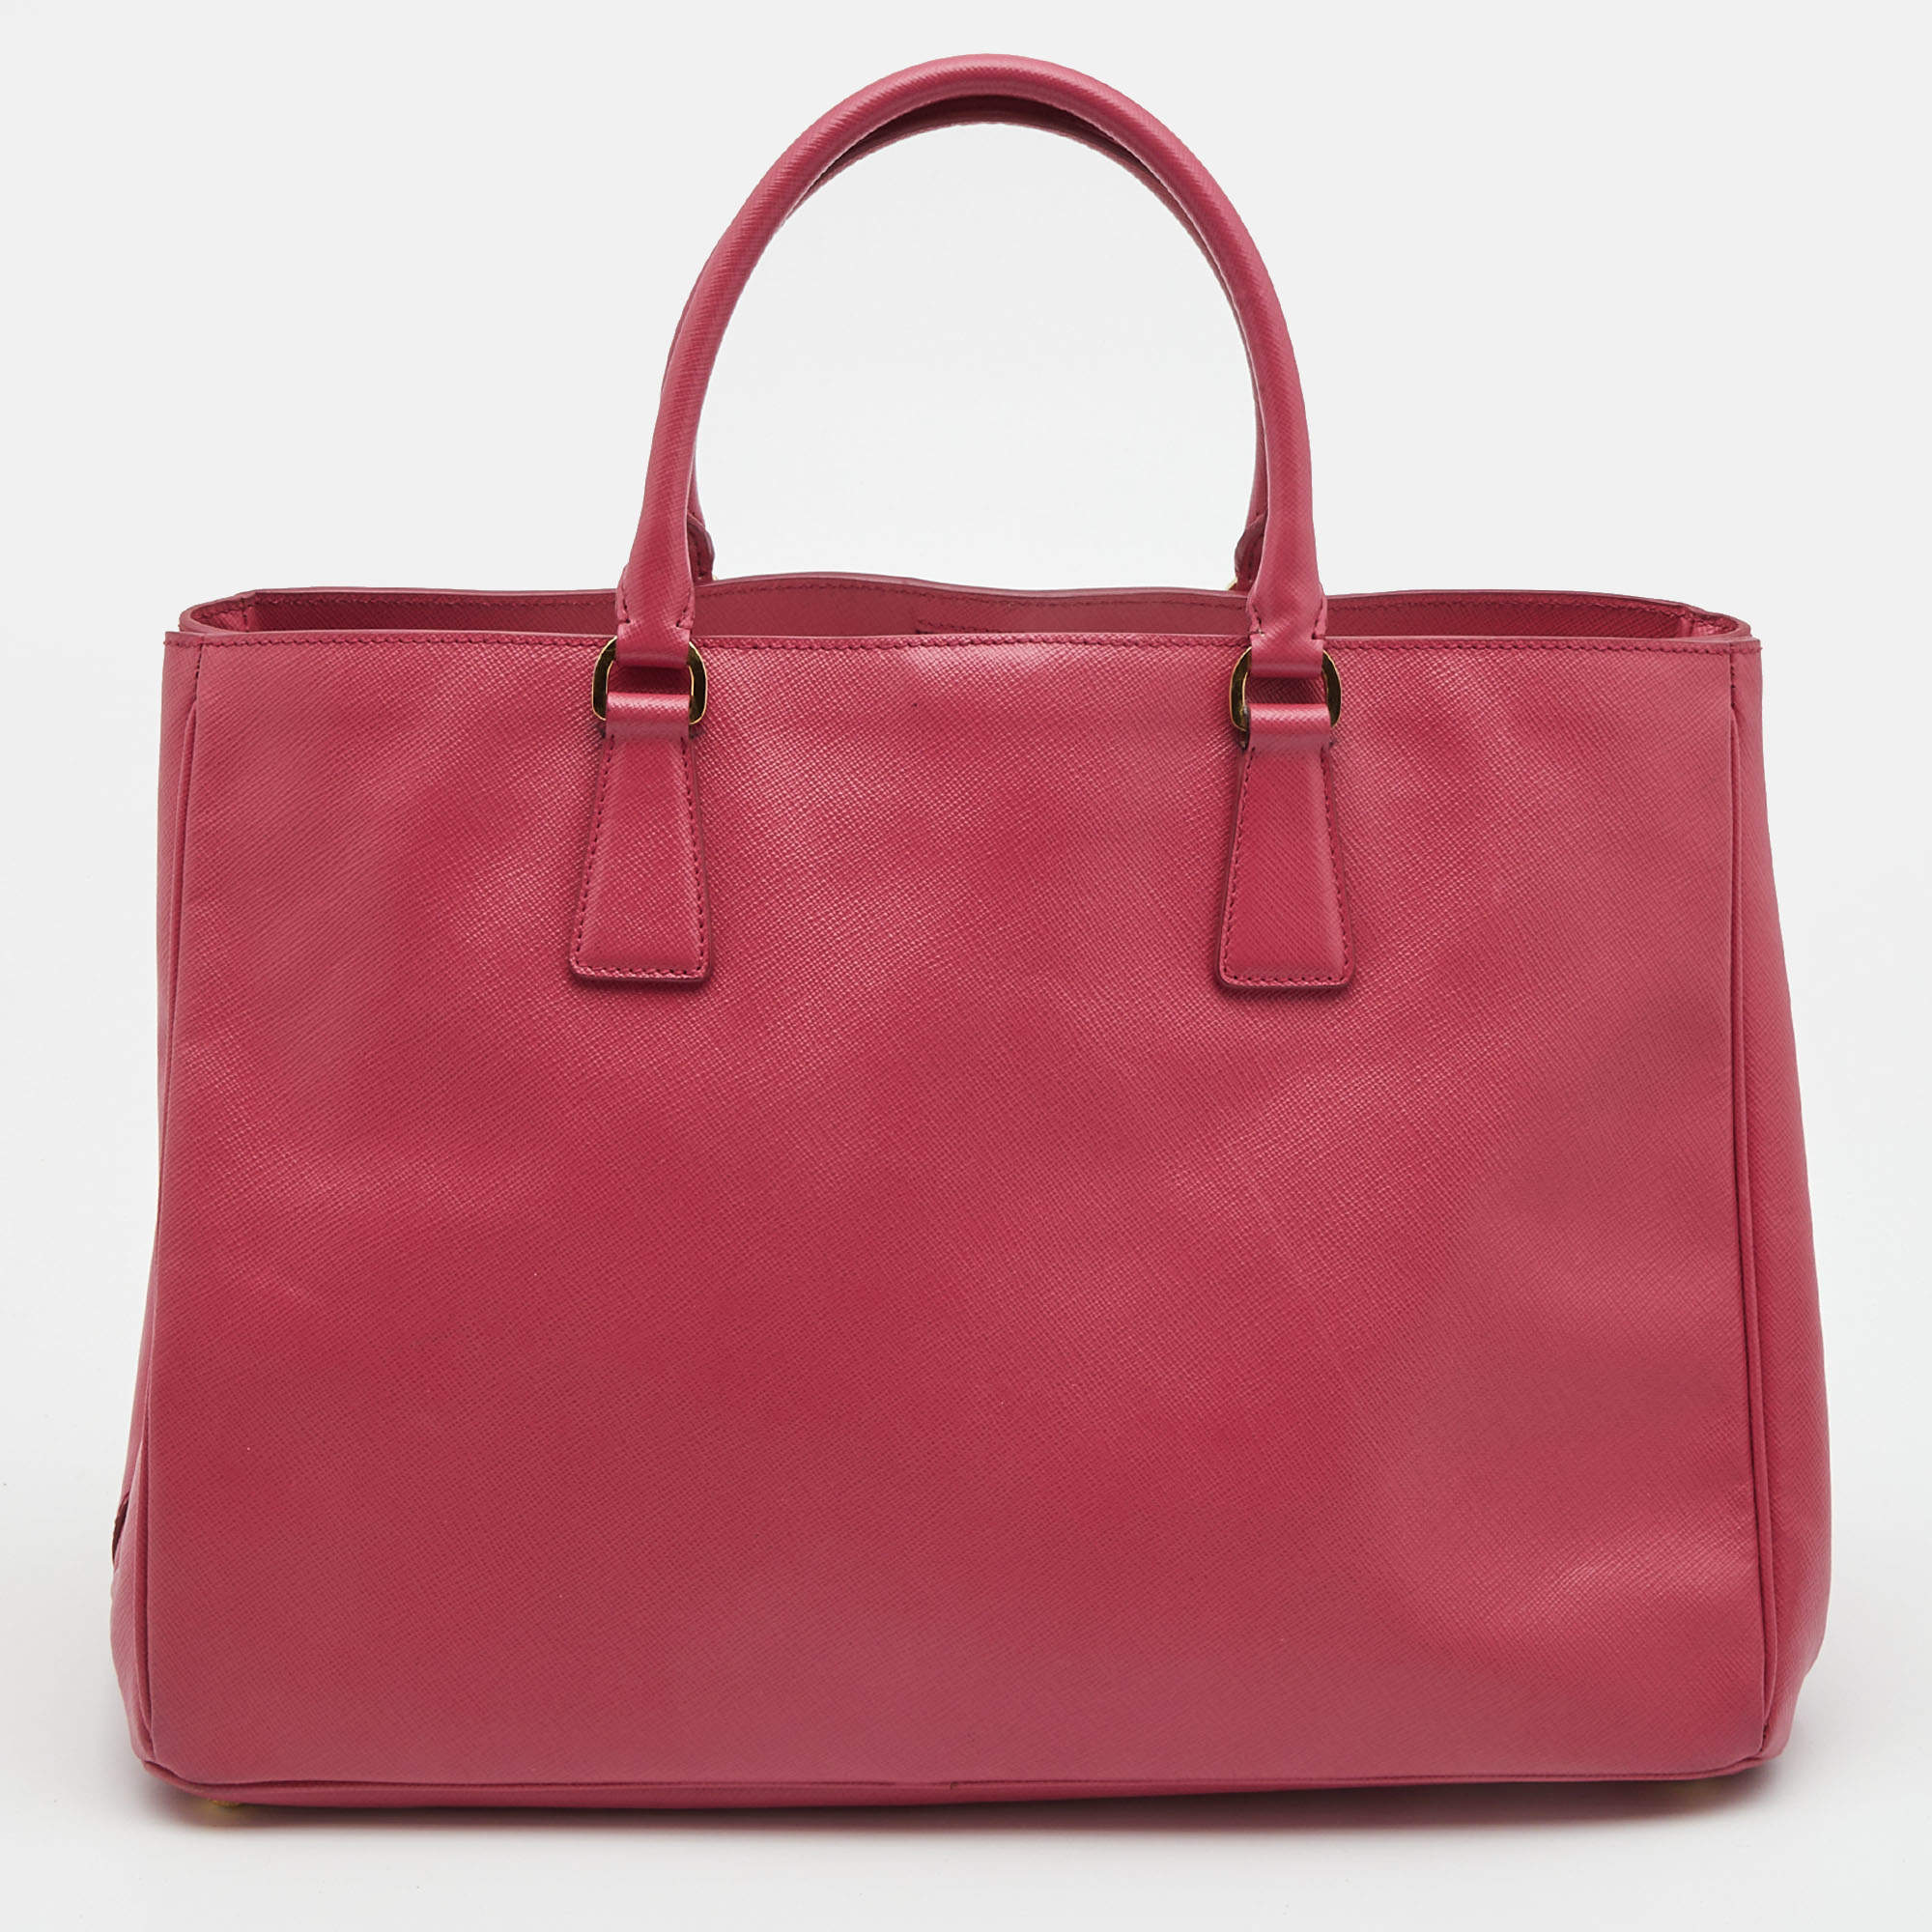 Prada Tamaris Pink Large Saffiano Lux Leather Tote Bag For Sale at